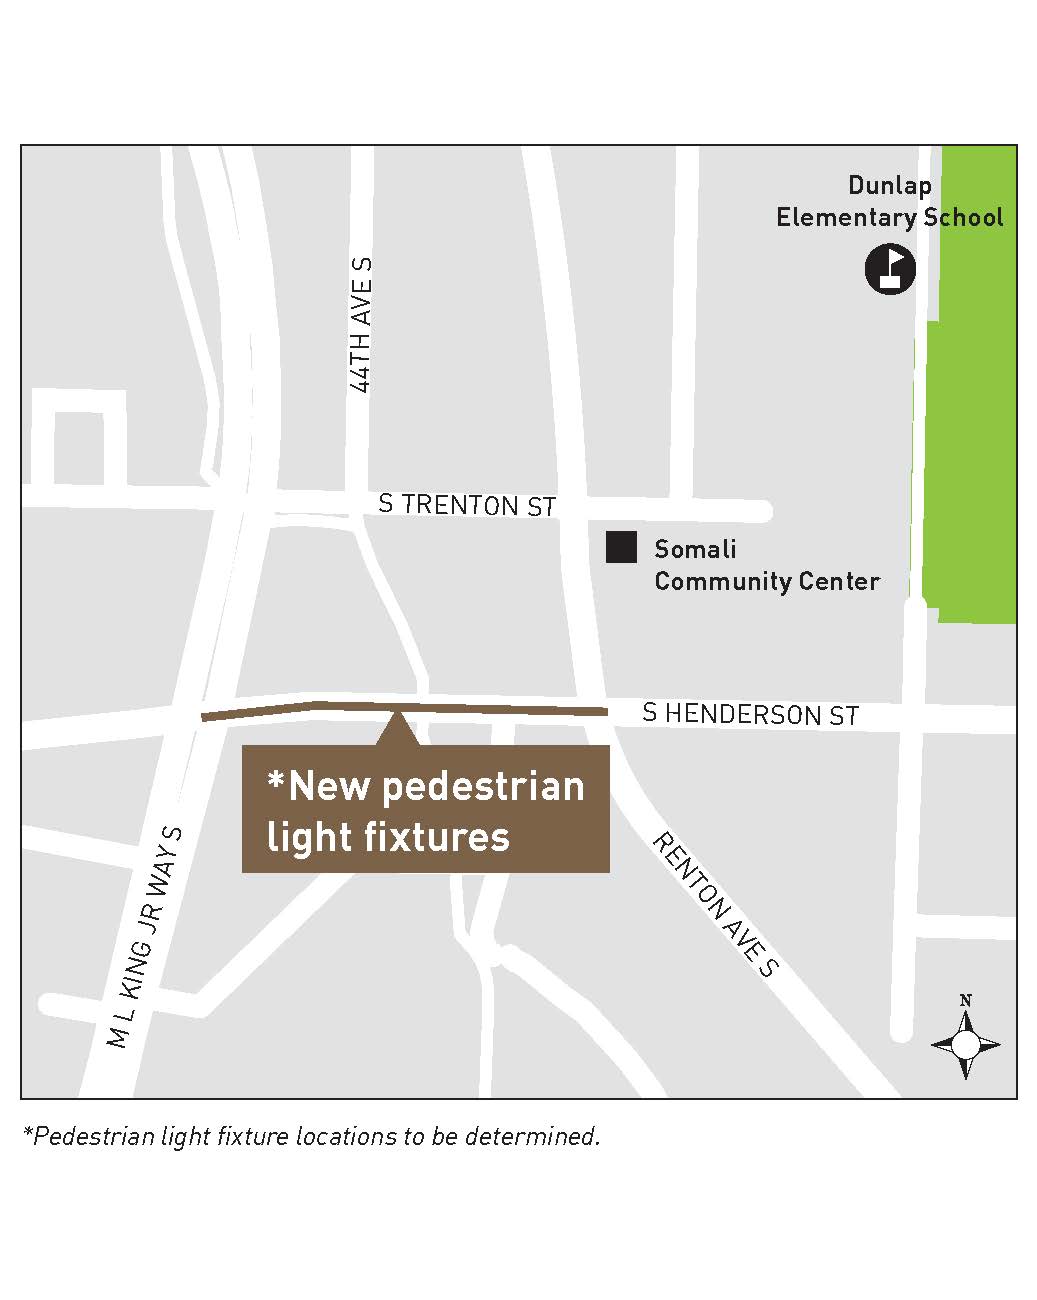 S Henderson St between MLK Jr Way S and Renton Ave S nighttime lighting upgrades map